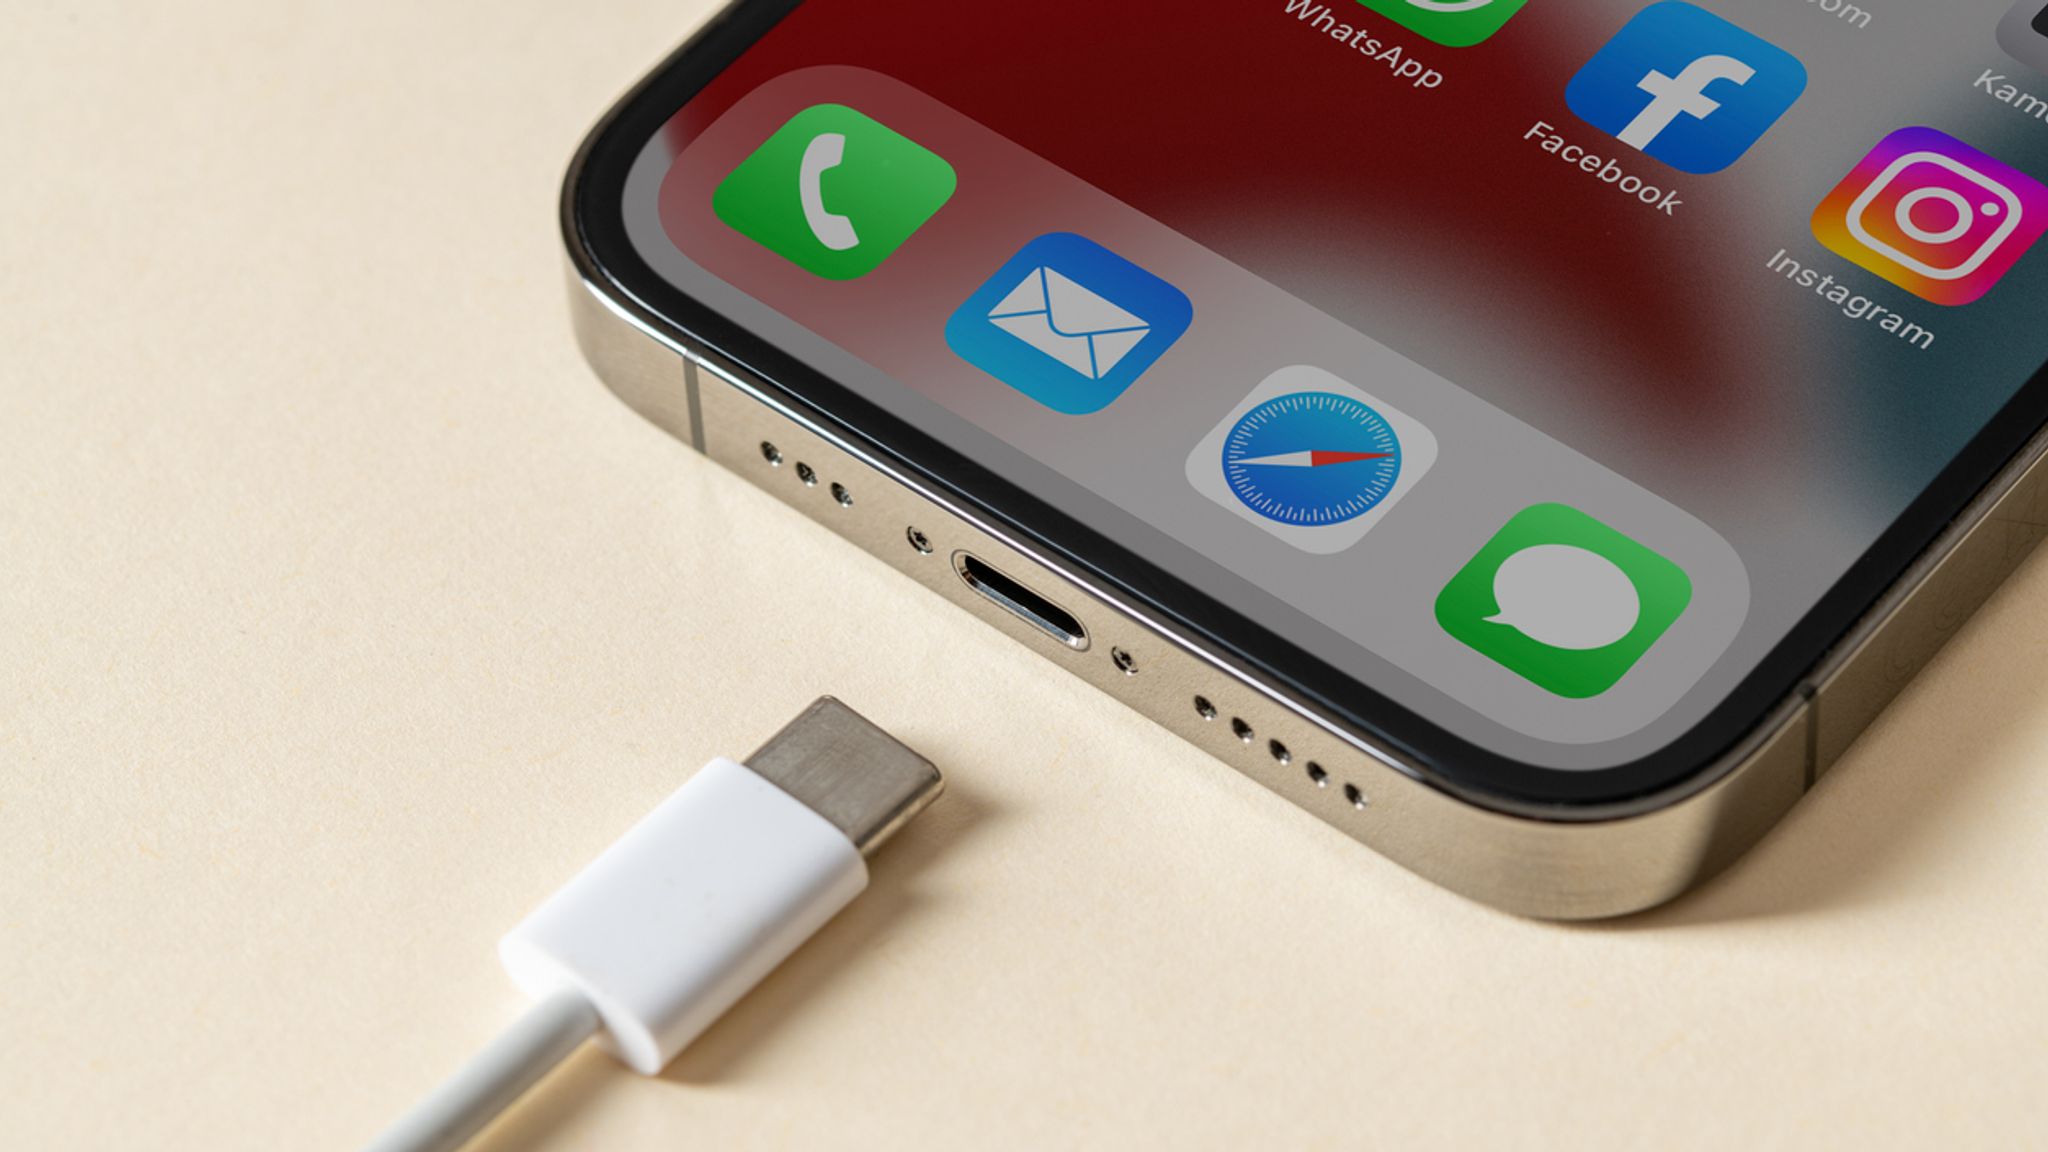 iPhone will feature USB-C charging port, says Apple executive | Science & Tech News | Sky